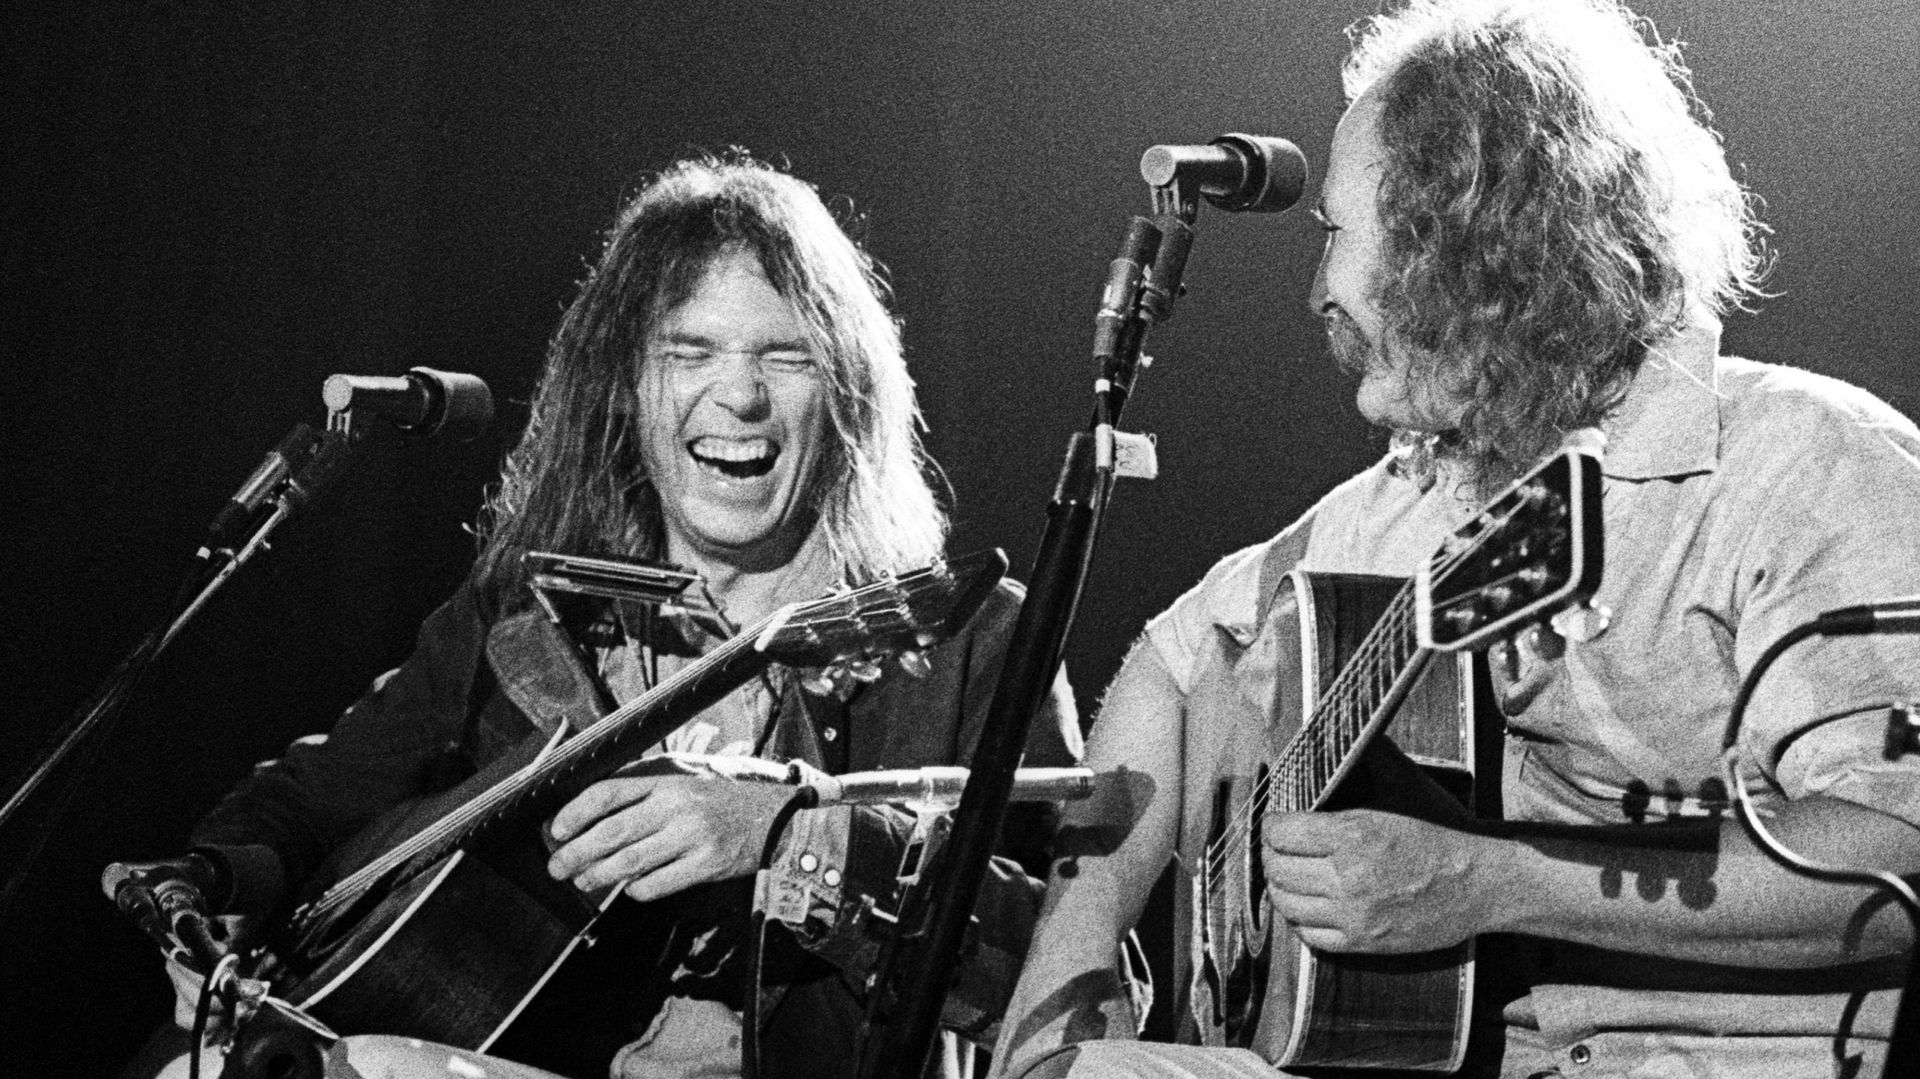 Neil Young, David Crosby